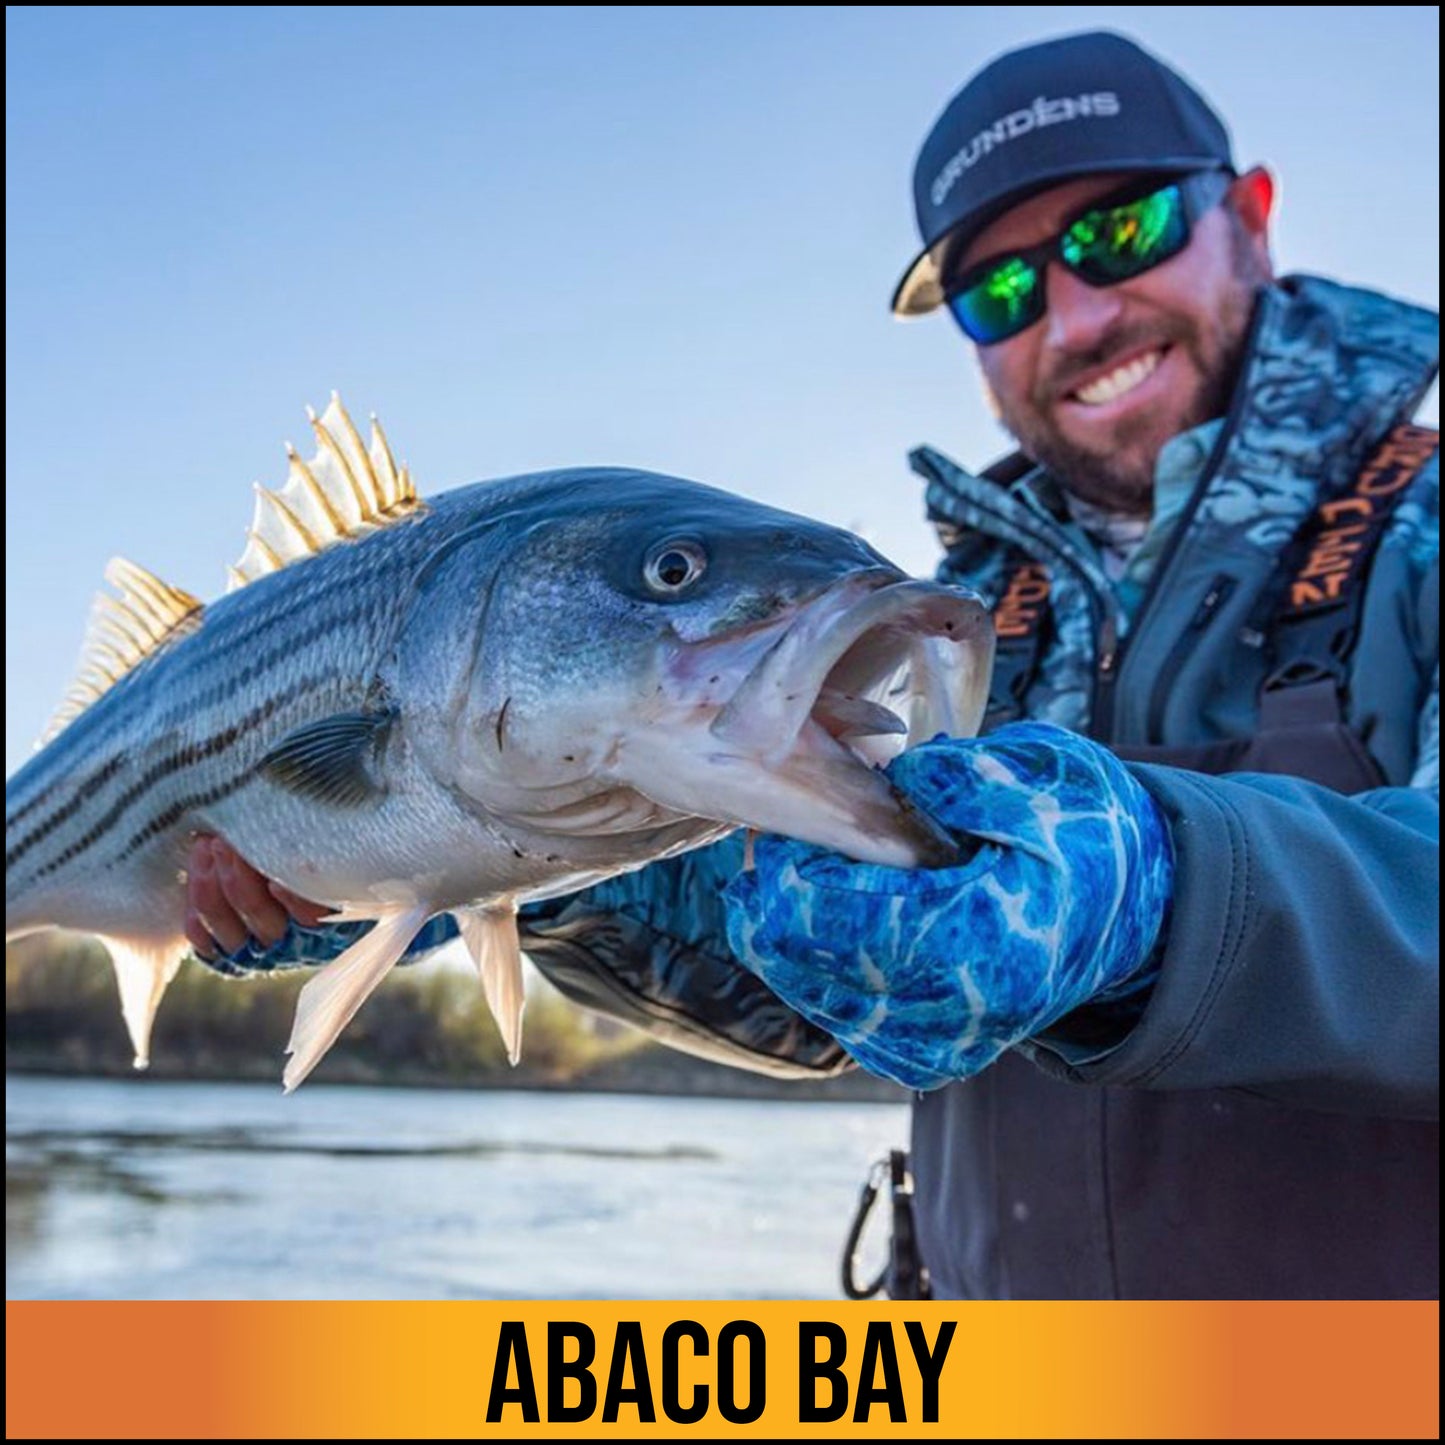 The Abaco Bay Sun Glove is the most popular model in our sun protection line. Independently tested and verified, it is rated at the maximum protection of UPF 50+. Providing both hand and wrist protection, this glove is great for any of your outdoor adventures. 2